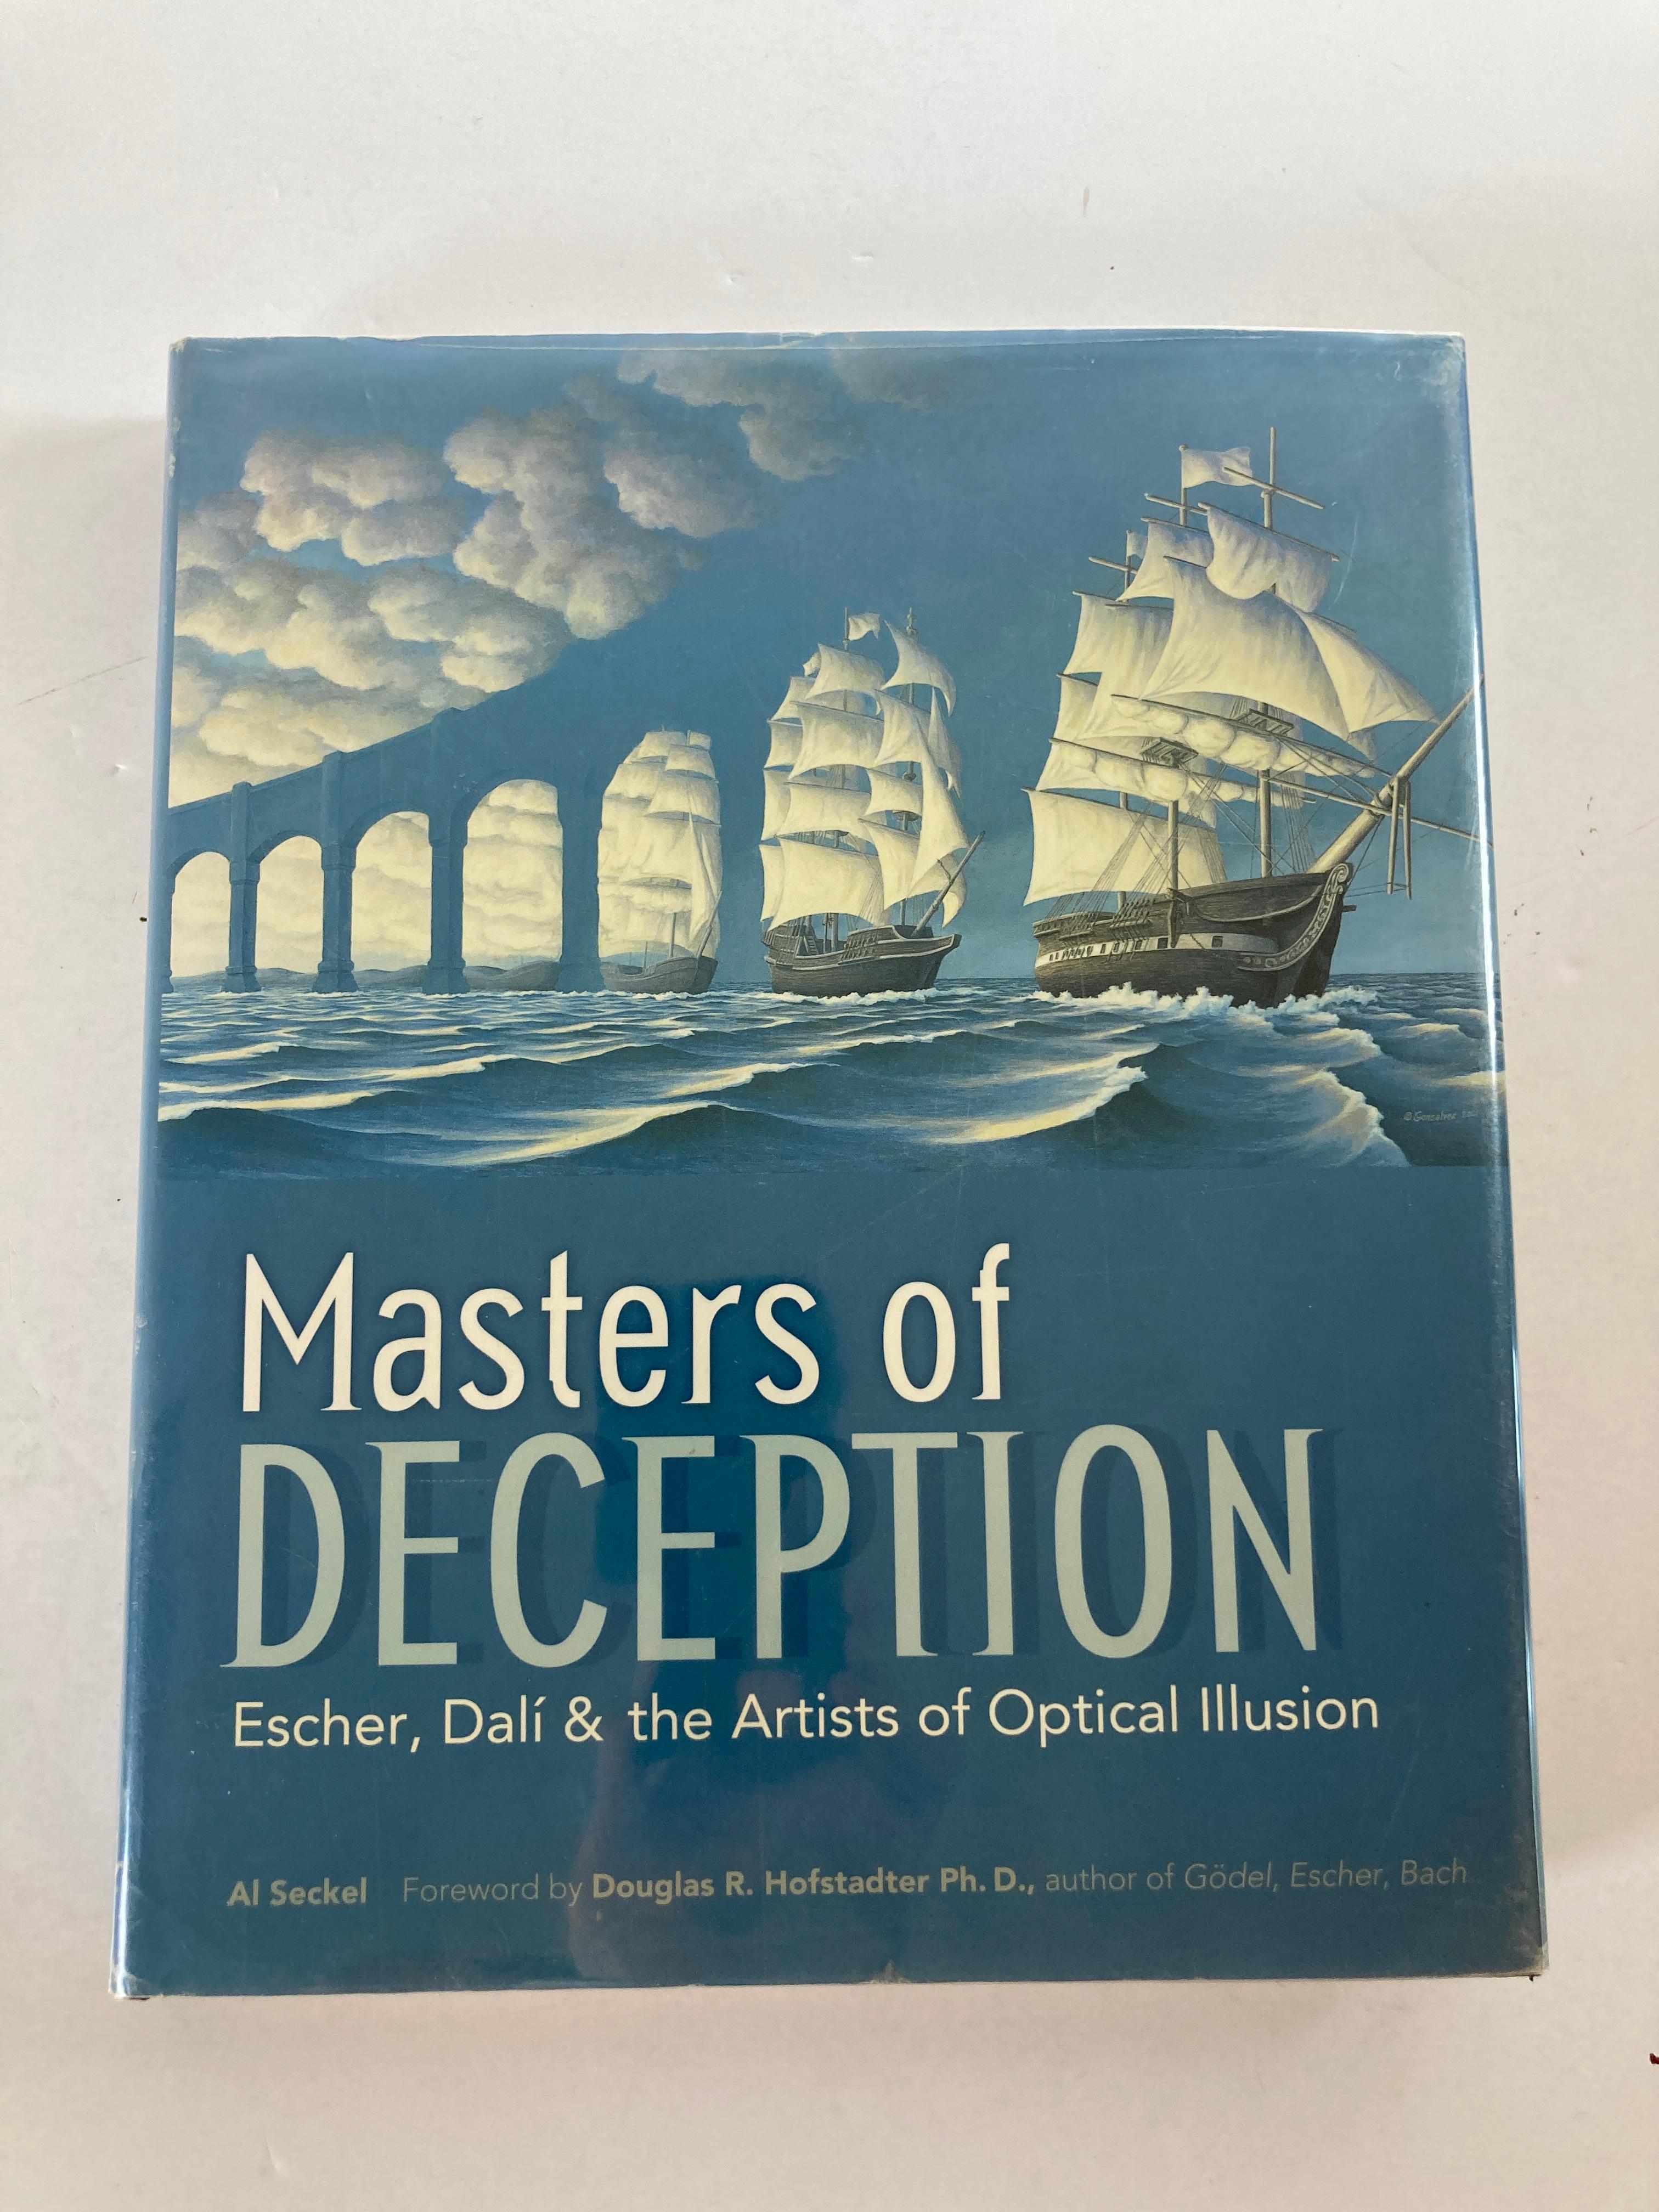 Masters of Deception: Escher, Dali, and the Artists of Optical Illusion,
By Al Seckel, Douglas R. Hofstadter
Astonishing creations by masters of the art, such as Escher, Dali, and Archimbolo; amazing visual trickery; and an illuminating foreword